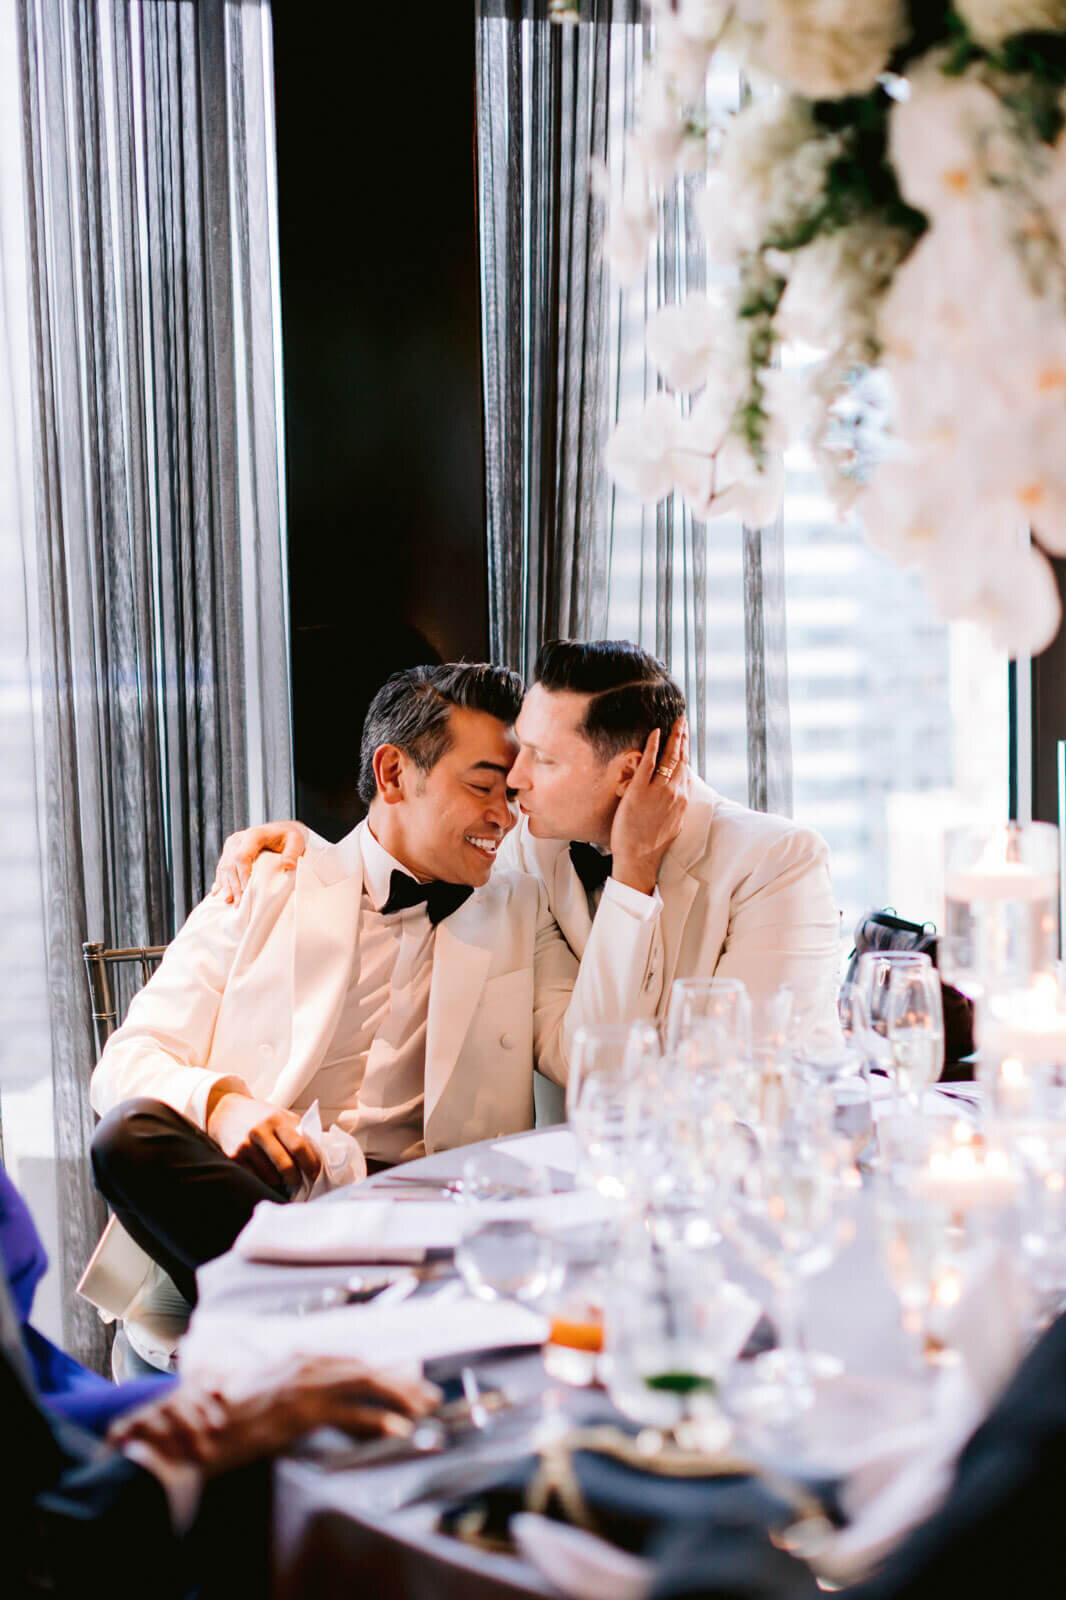 The groom is kissing the other groom on the nose during the reception in The Skylark, New York. Wedding Image by Jenny Fu Studio